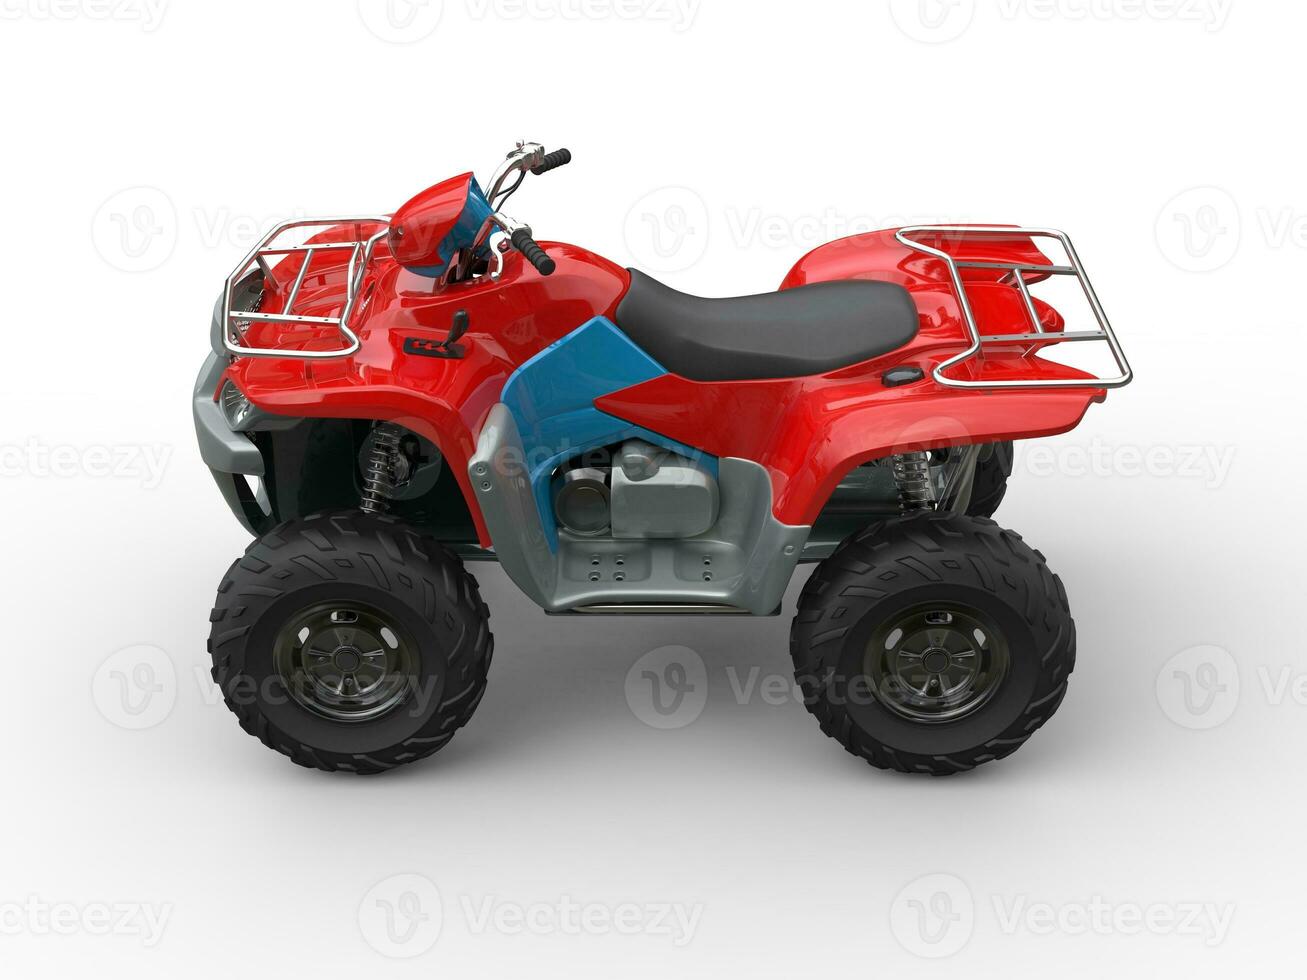 Red blue quad bike - top side view photo